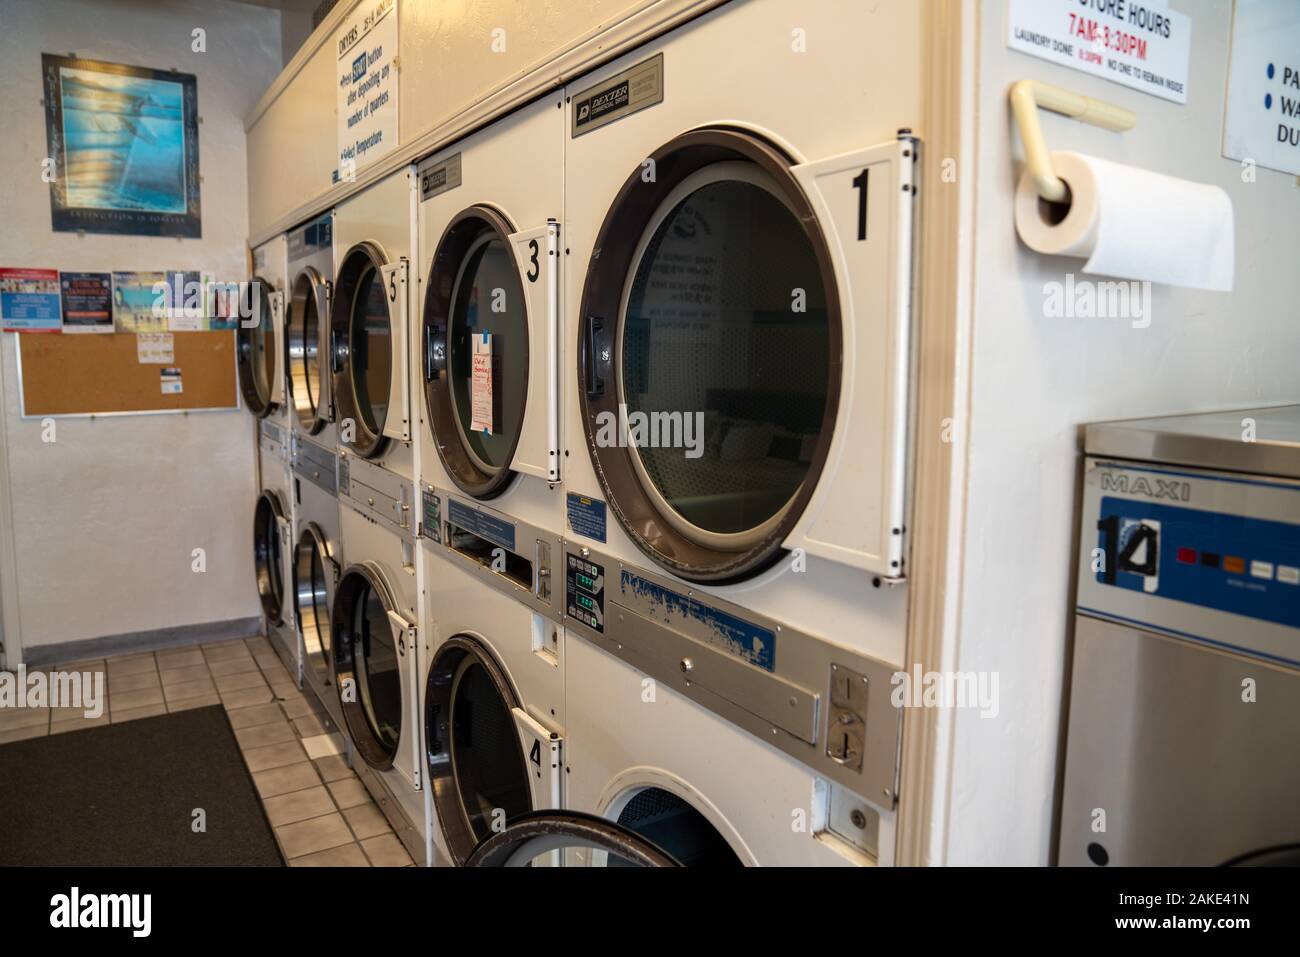 Rows of washing and drying machines at a laundromart Stock Photo